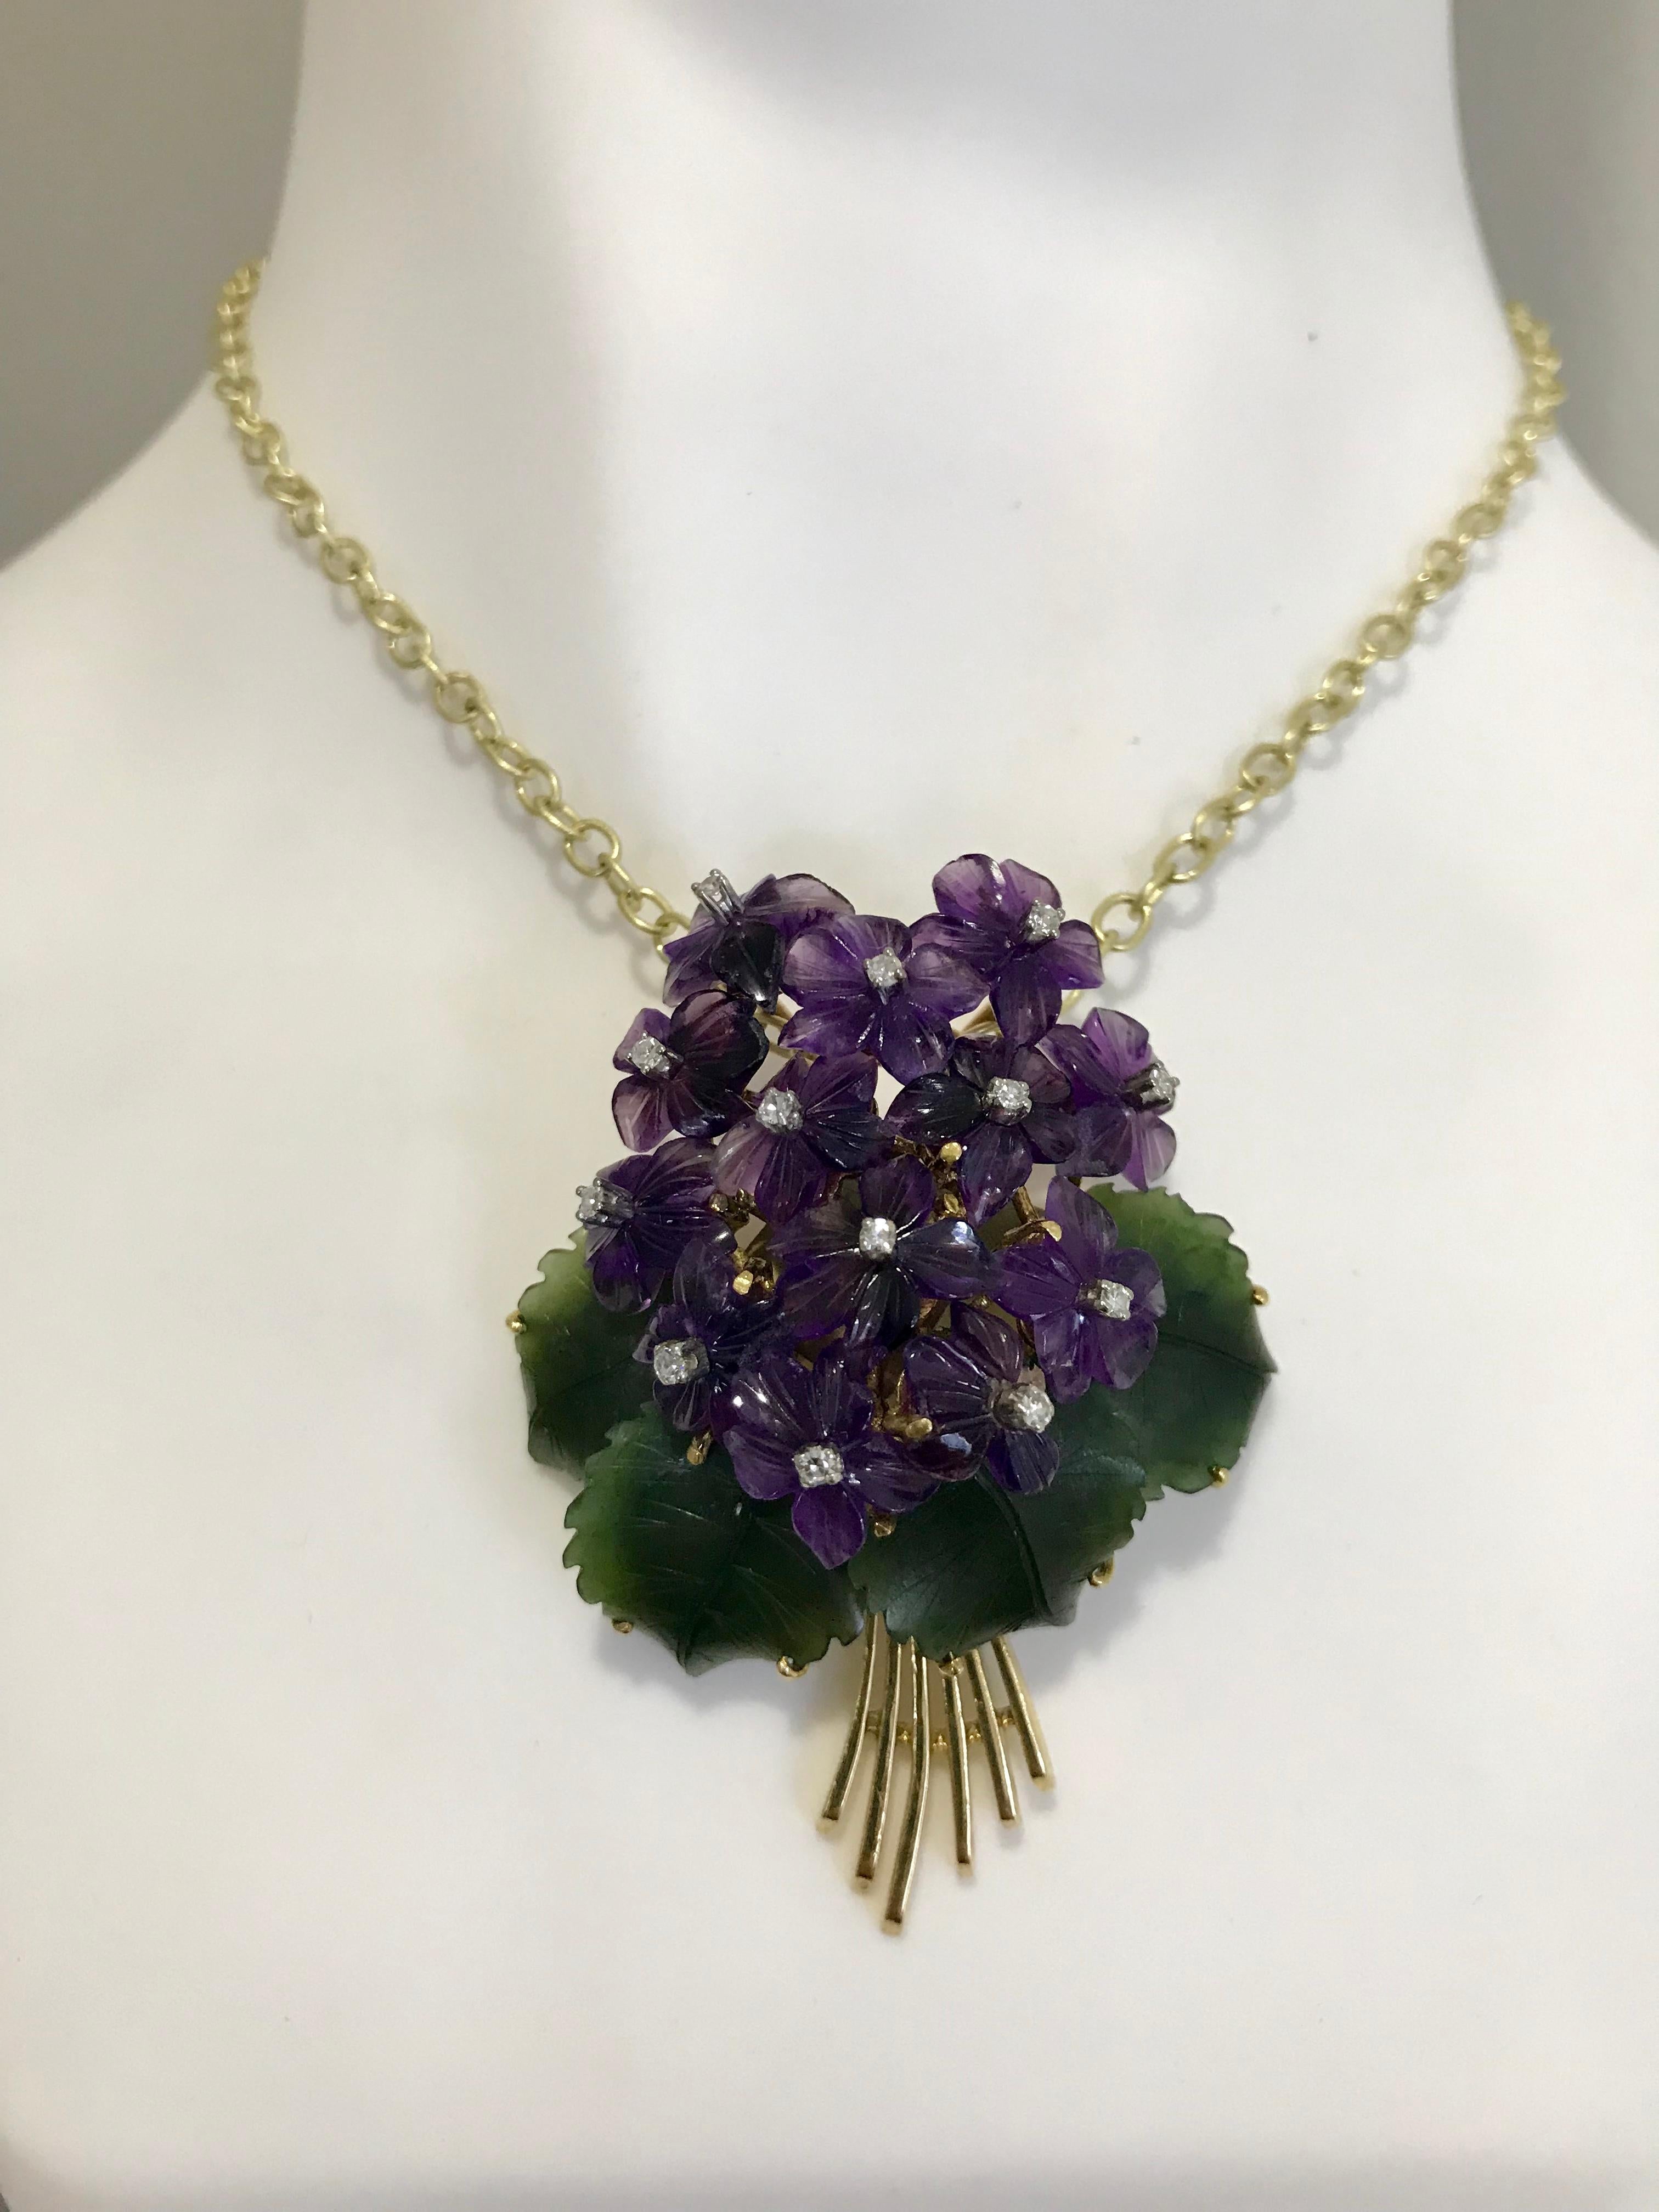 Vintage 18k yellow gold Diamond, Amethyst, Nephrite Jade Flower Brooch/Pendant.   

Vintage carved Nephrite leaves surround a beautiful bouquet of Amethyst African violet flowers each featuring a sparkling diamond.  Superior craftsmanship and